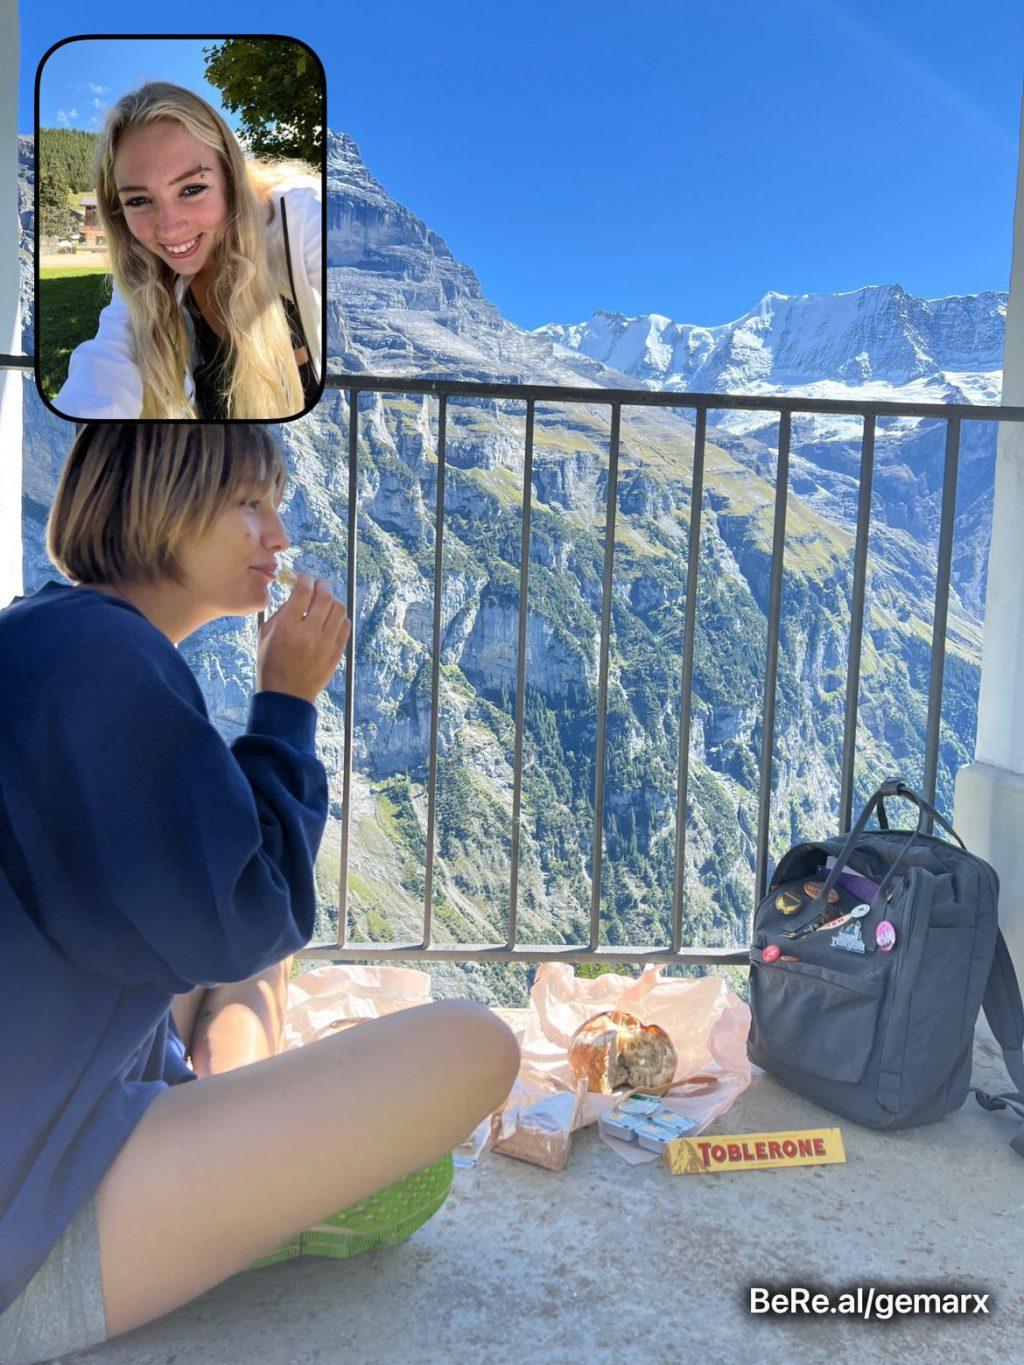 Grace Marx captured the mountains of Lauterbrunnen, Switzerland in her BeReal. The two friends enjoyed their view and some snacks. Photo courtesy of Grace Marx